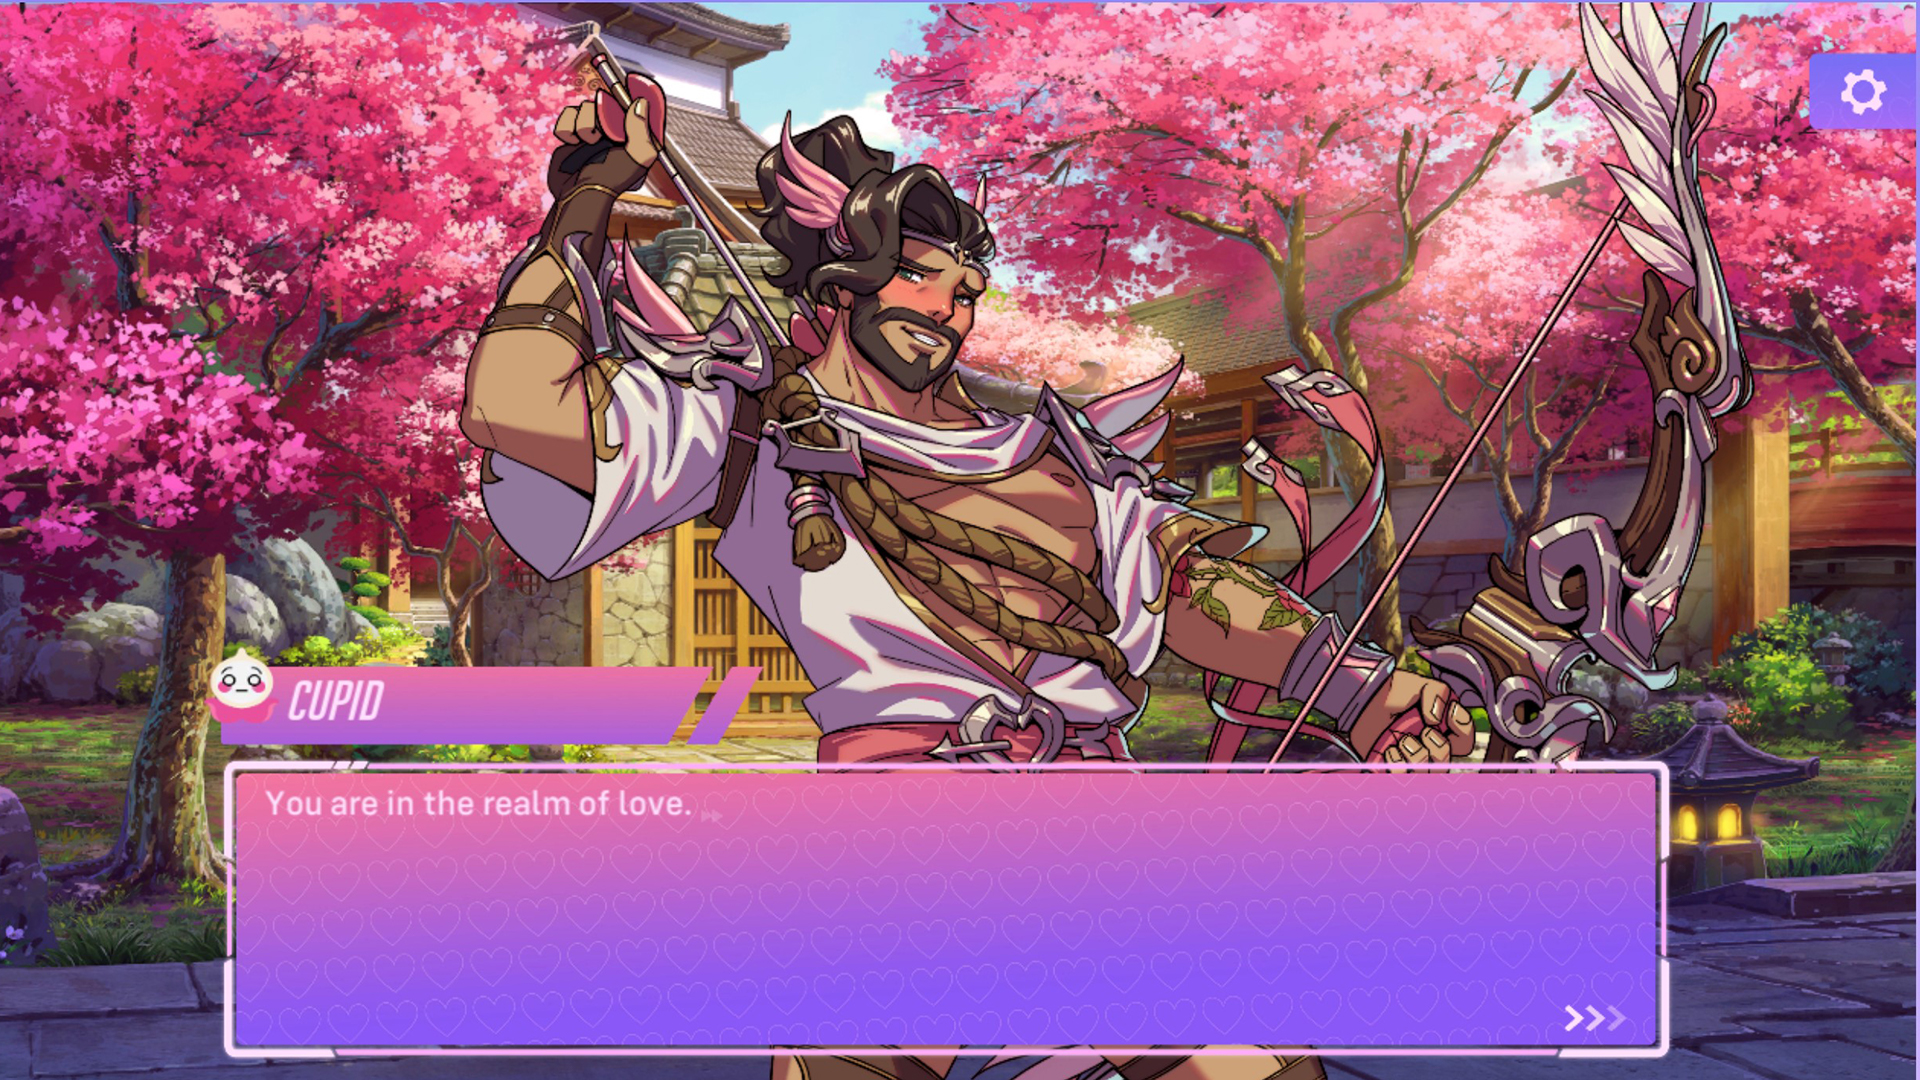 Overwatch dating sim - Cupid Hanzo dialogue on a date